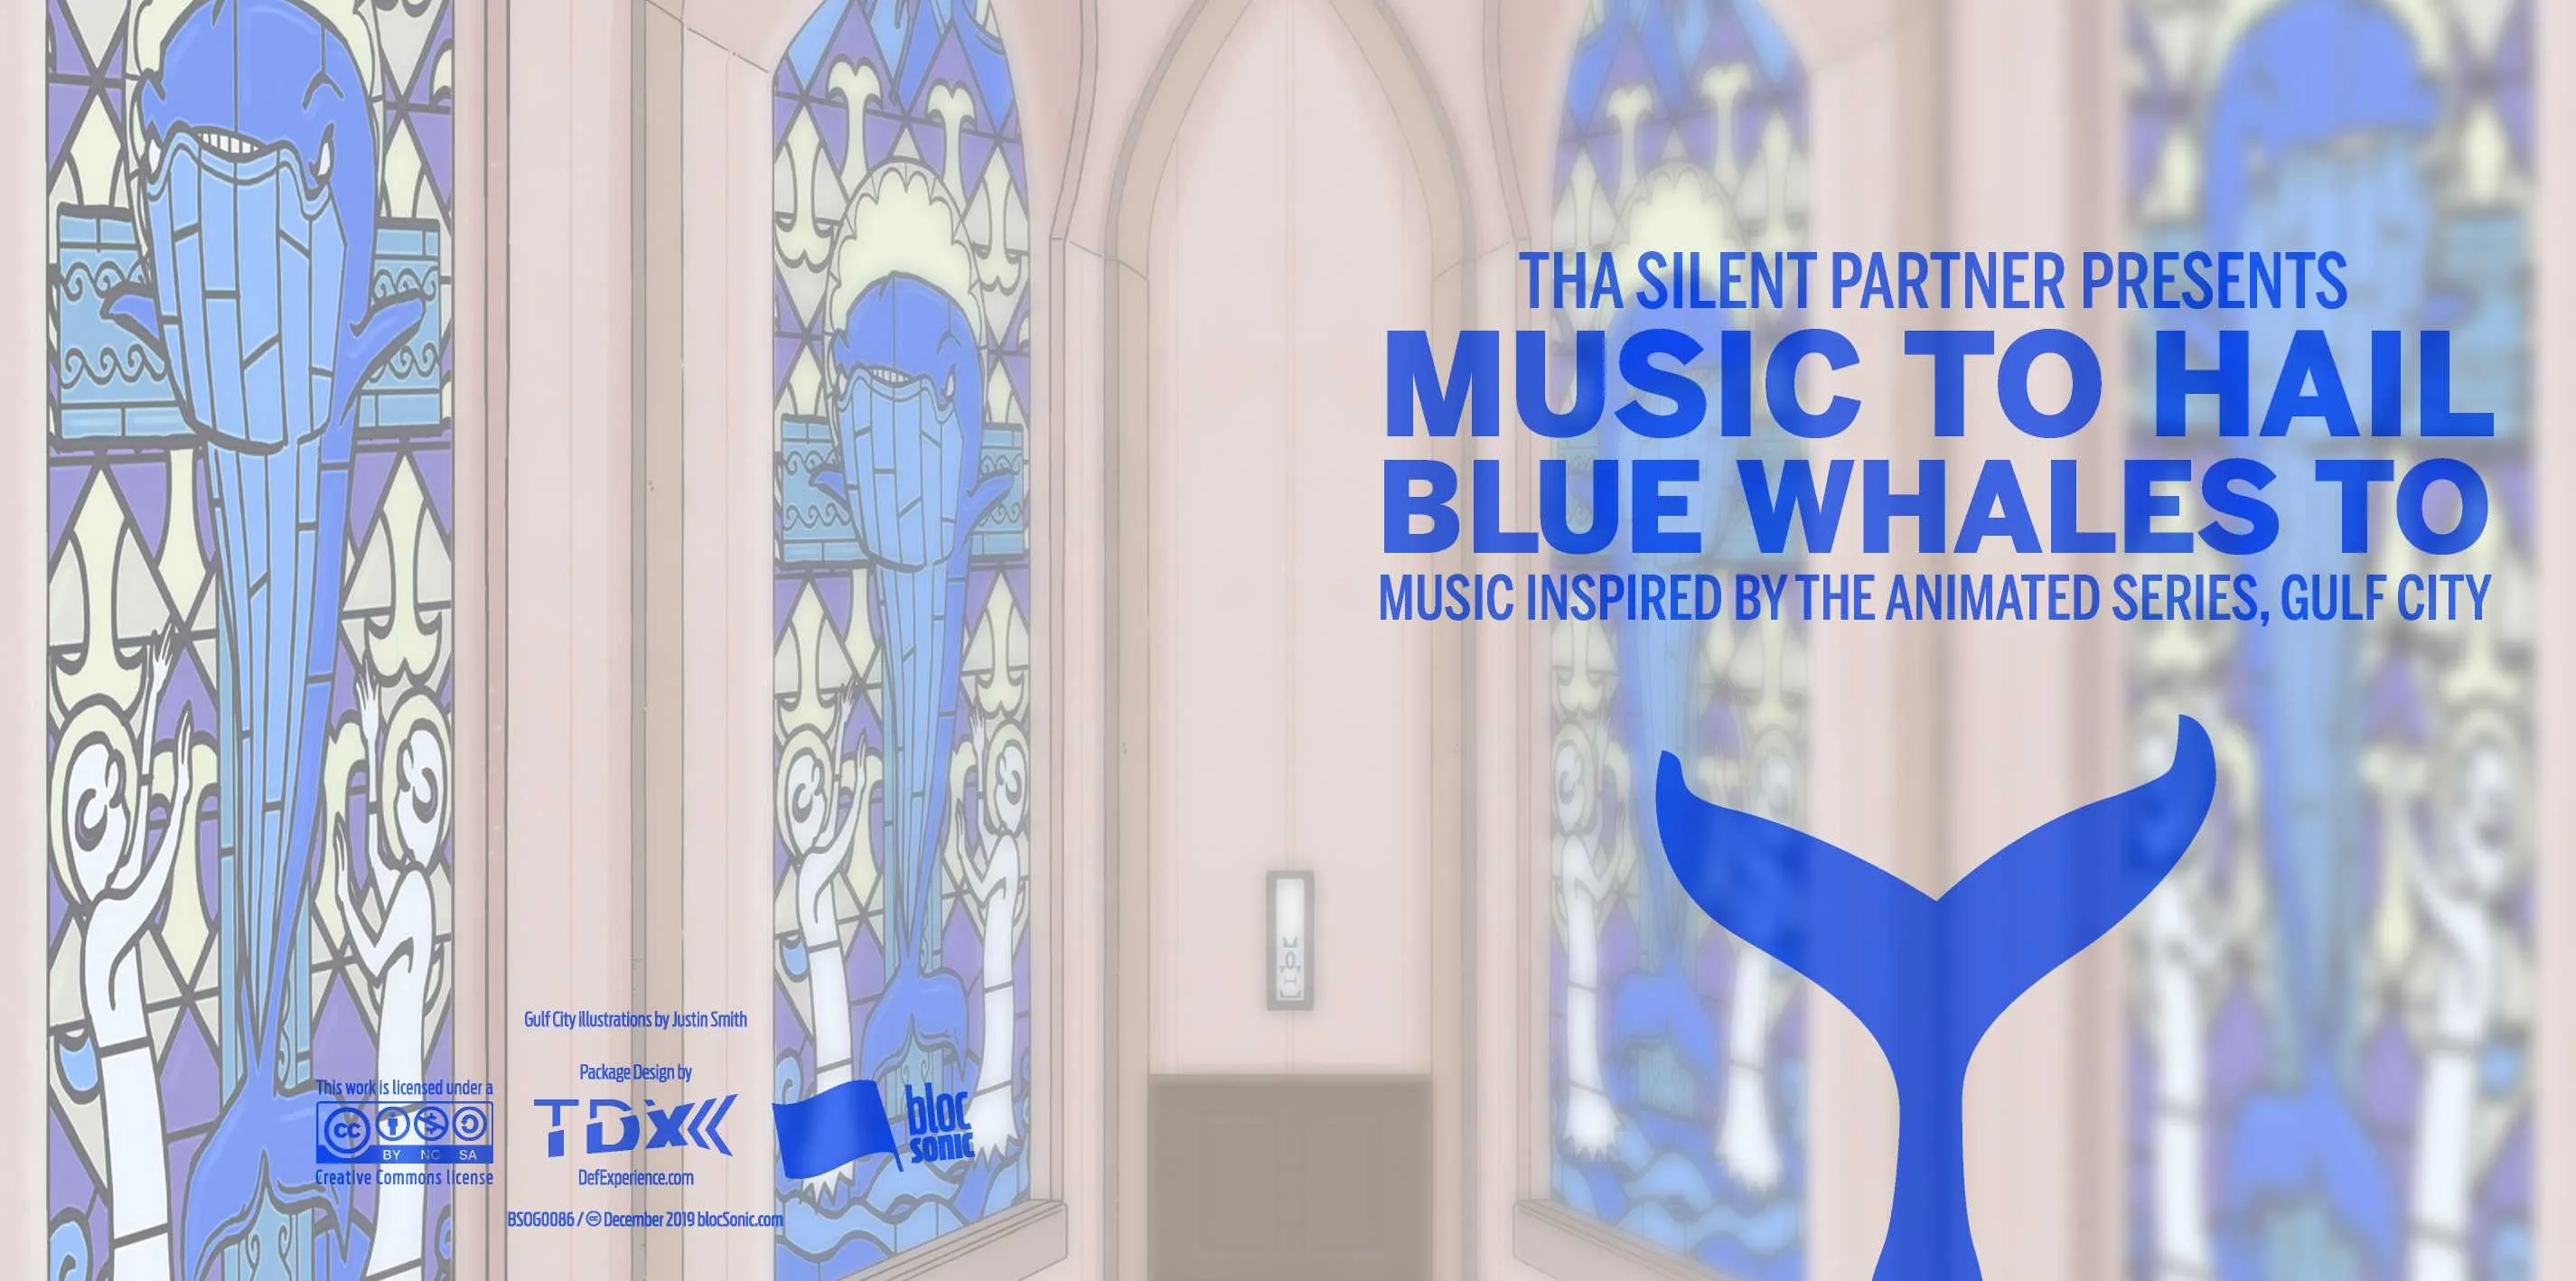 Album insert for “Music To Hail Blue Whales To (Music Inspired By The Animated Series, Gulf City)” by Tha Silent Partner